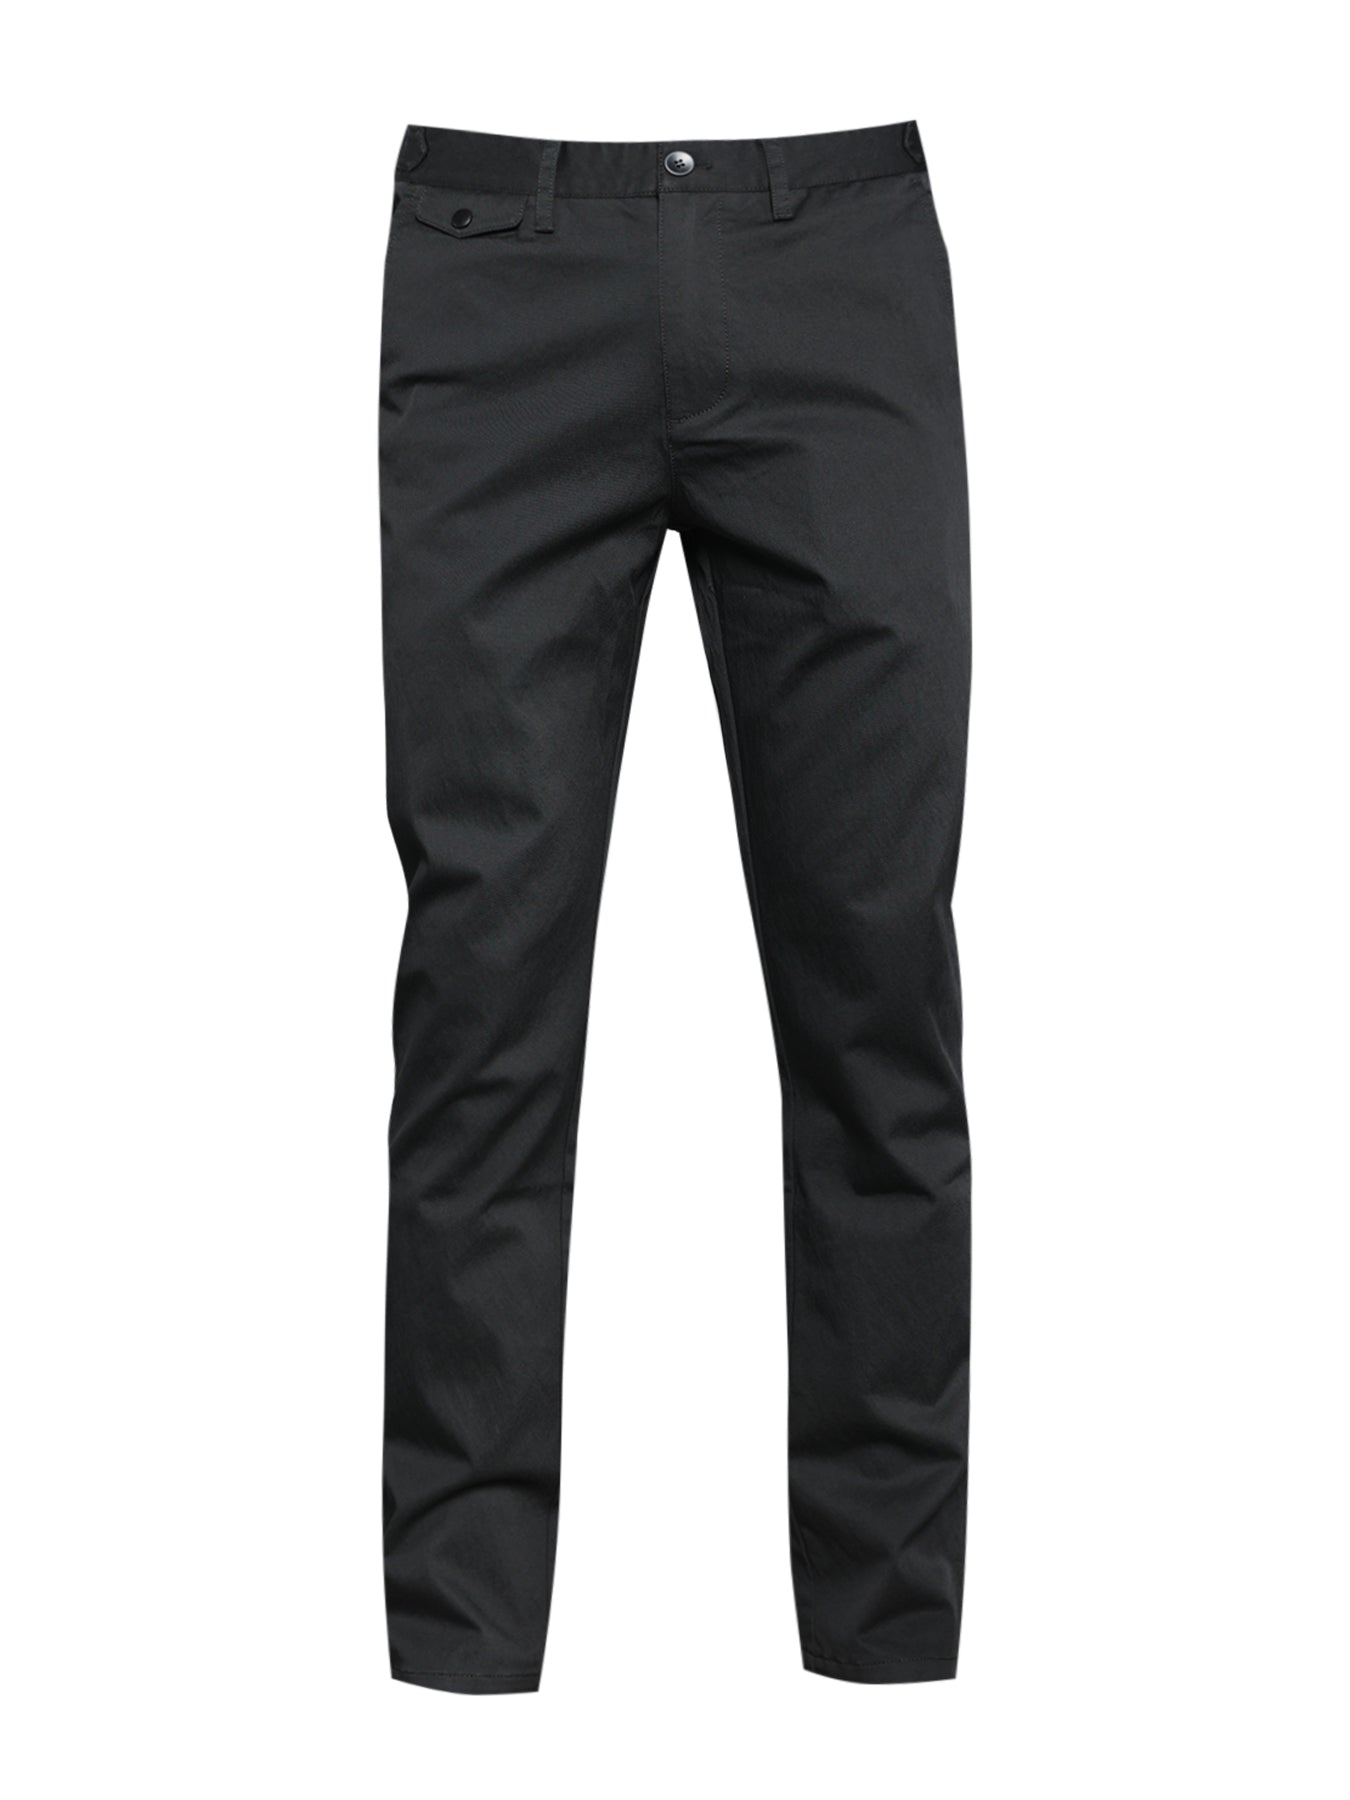 Skinny Chino Pants with Flip Pockets - XIOS America